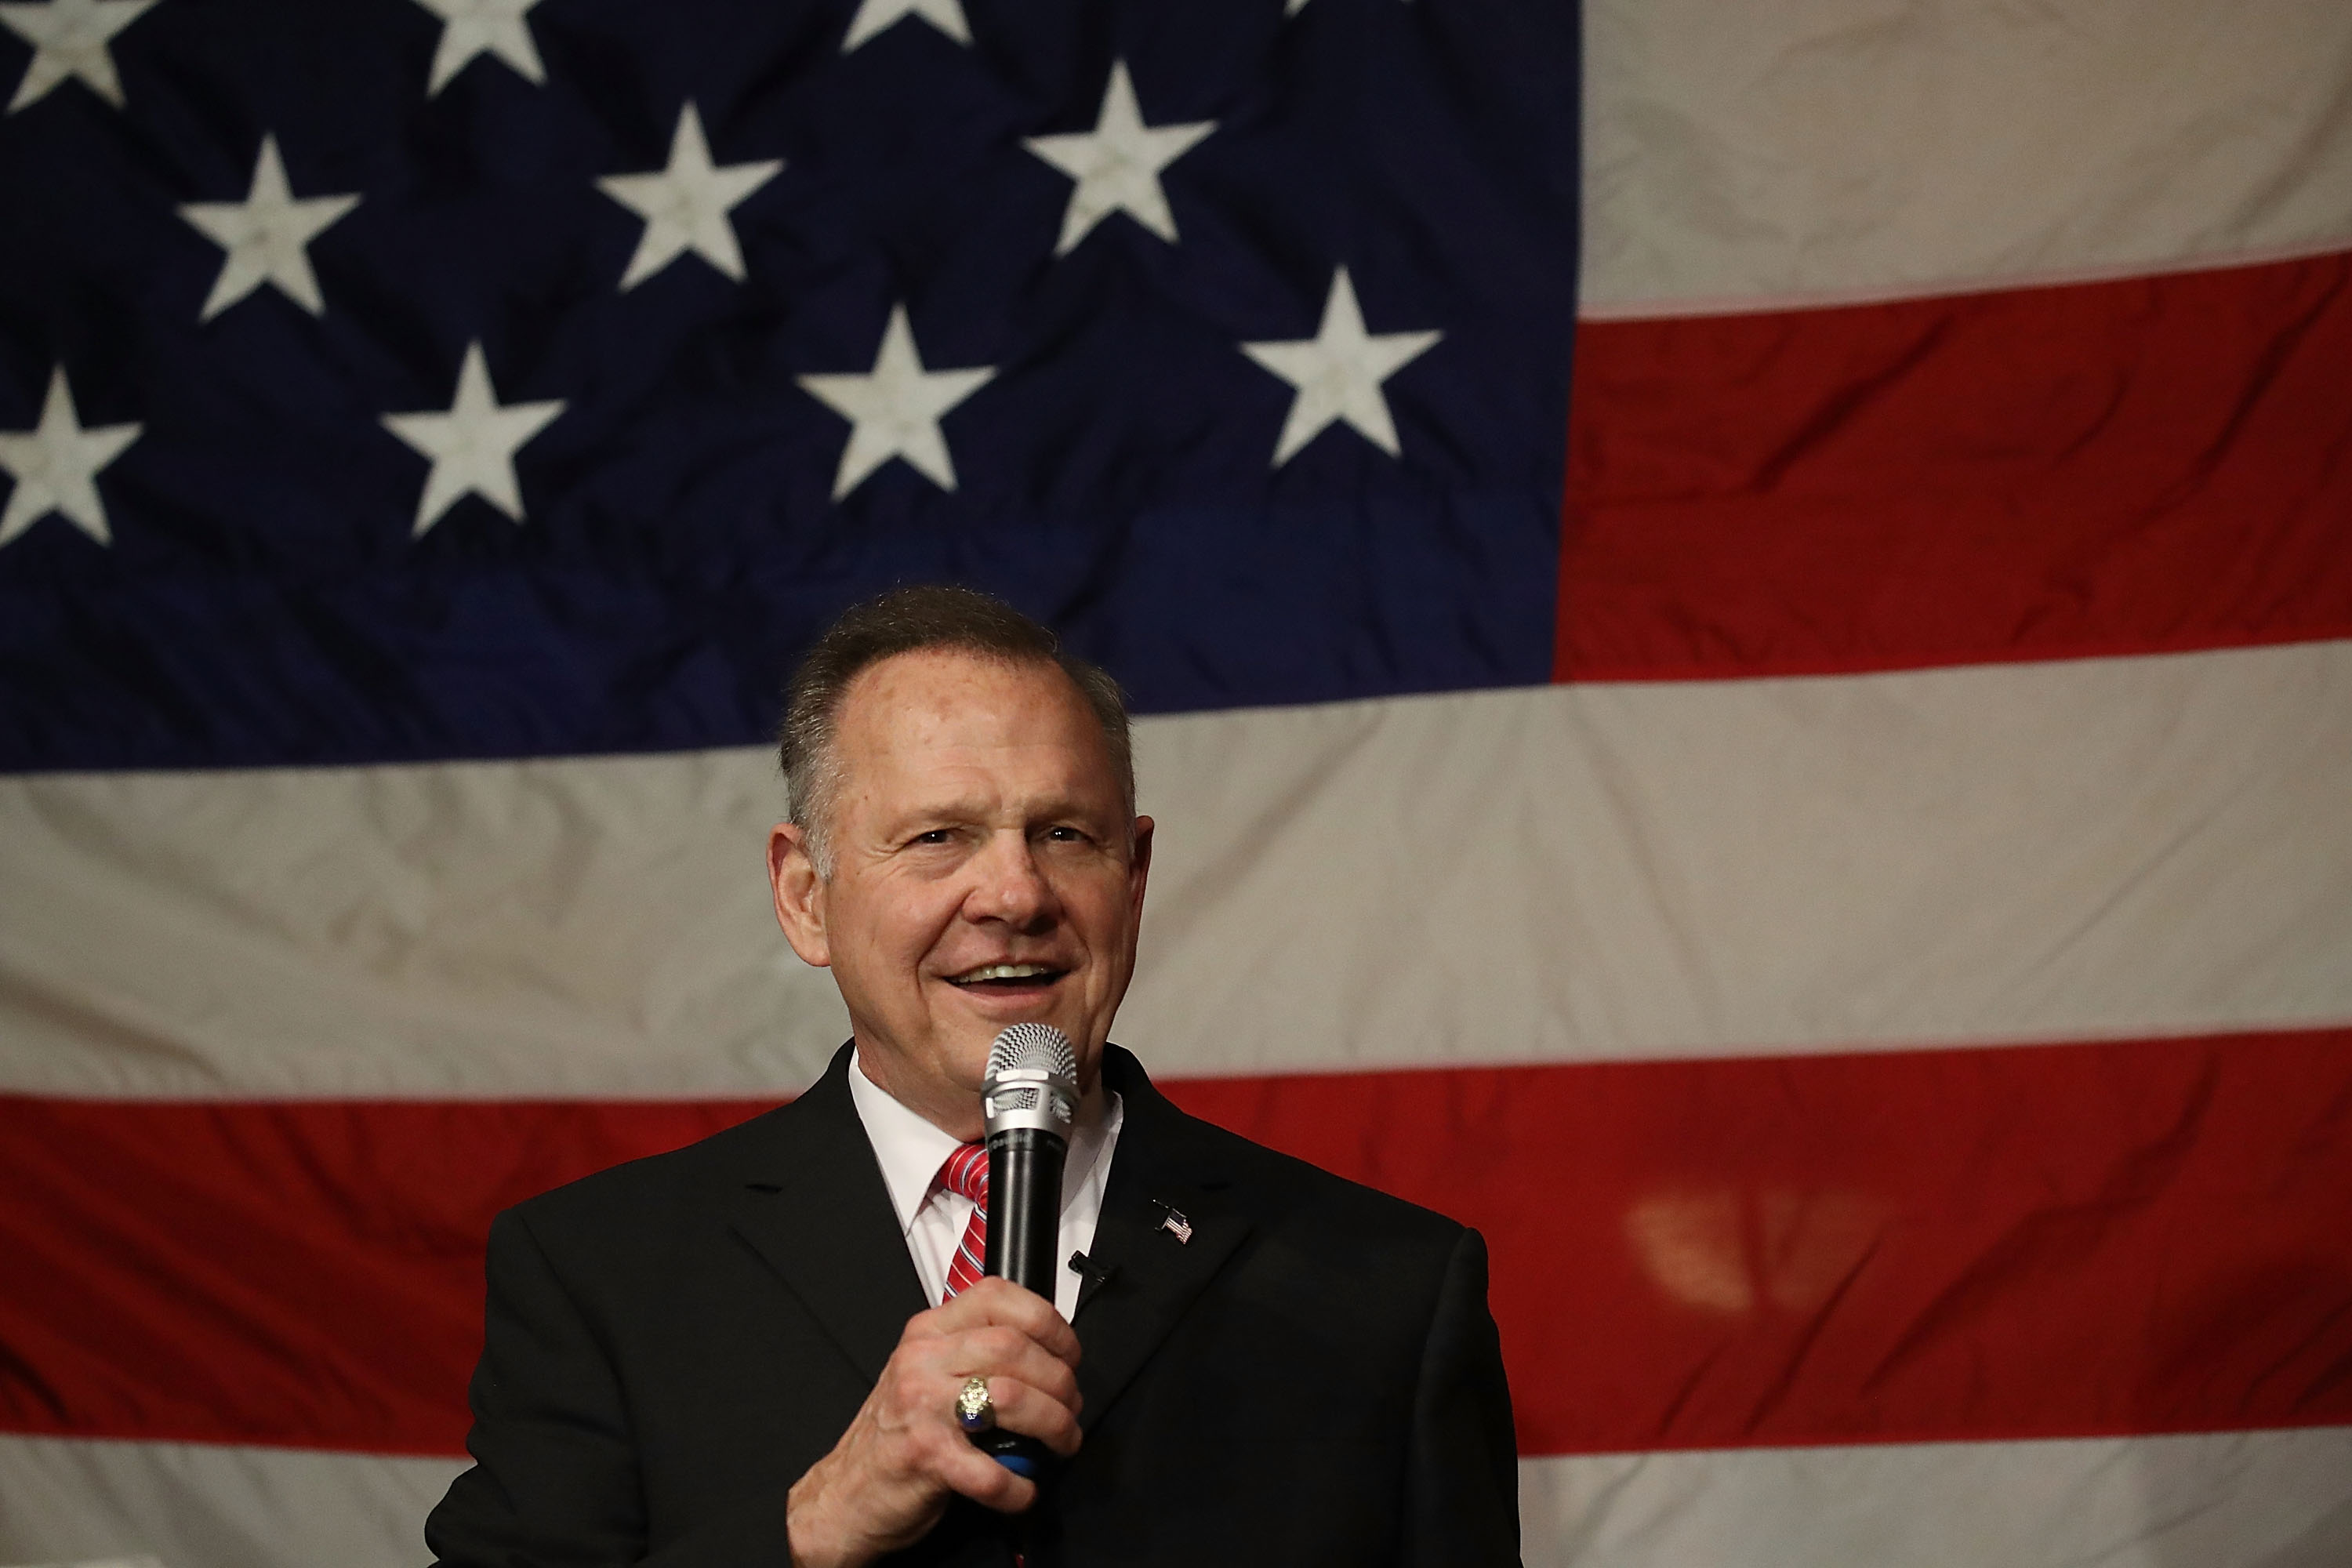 Alabama Special Election candidate Roy Moore